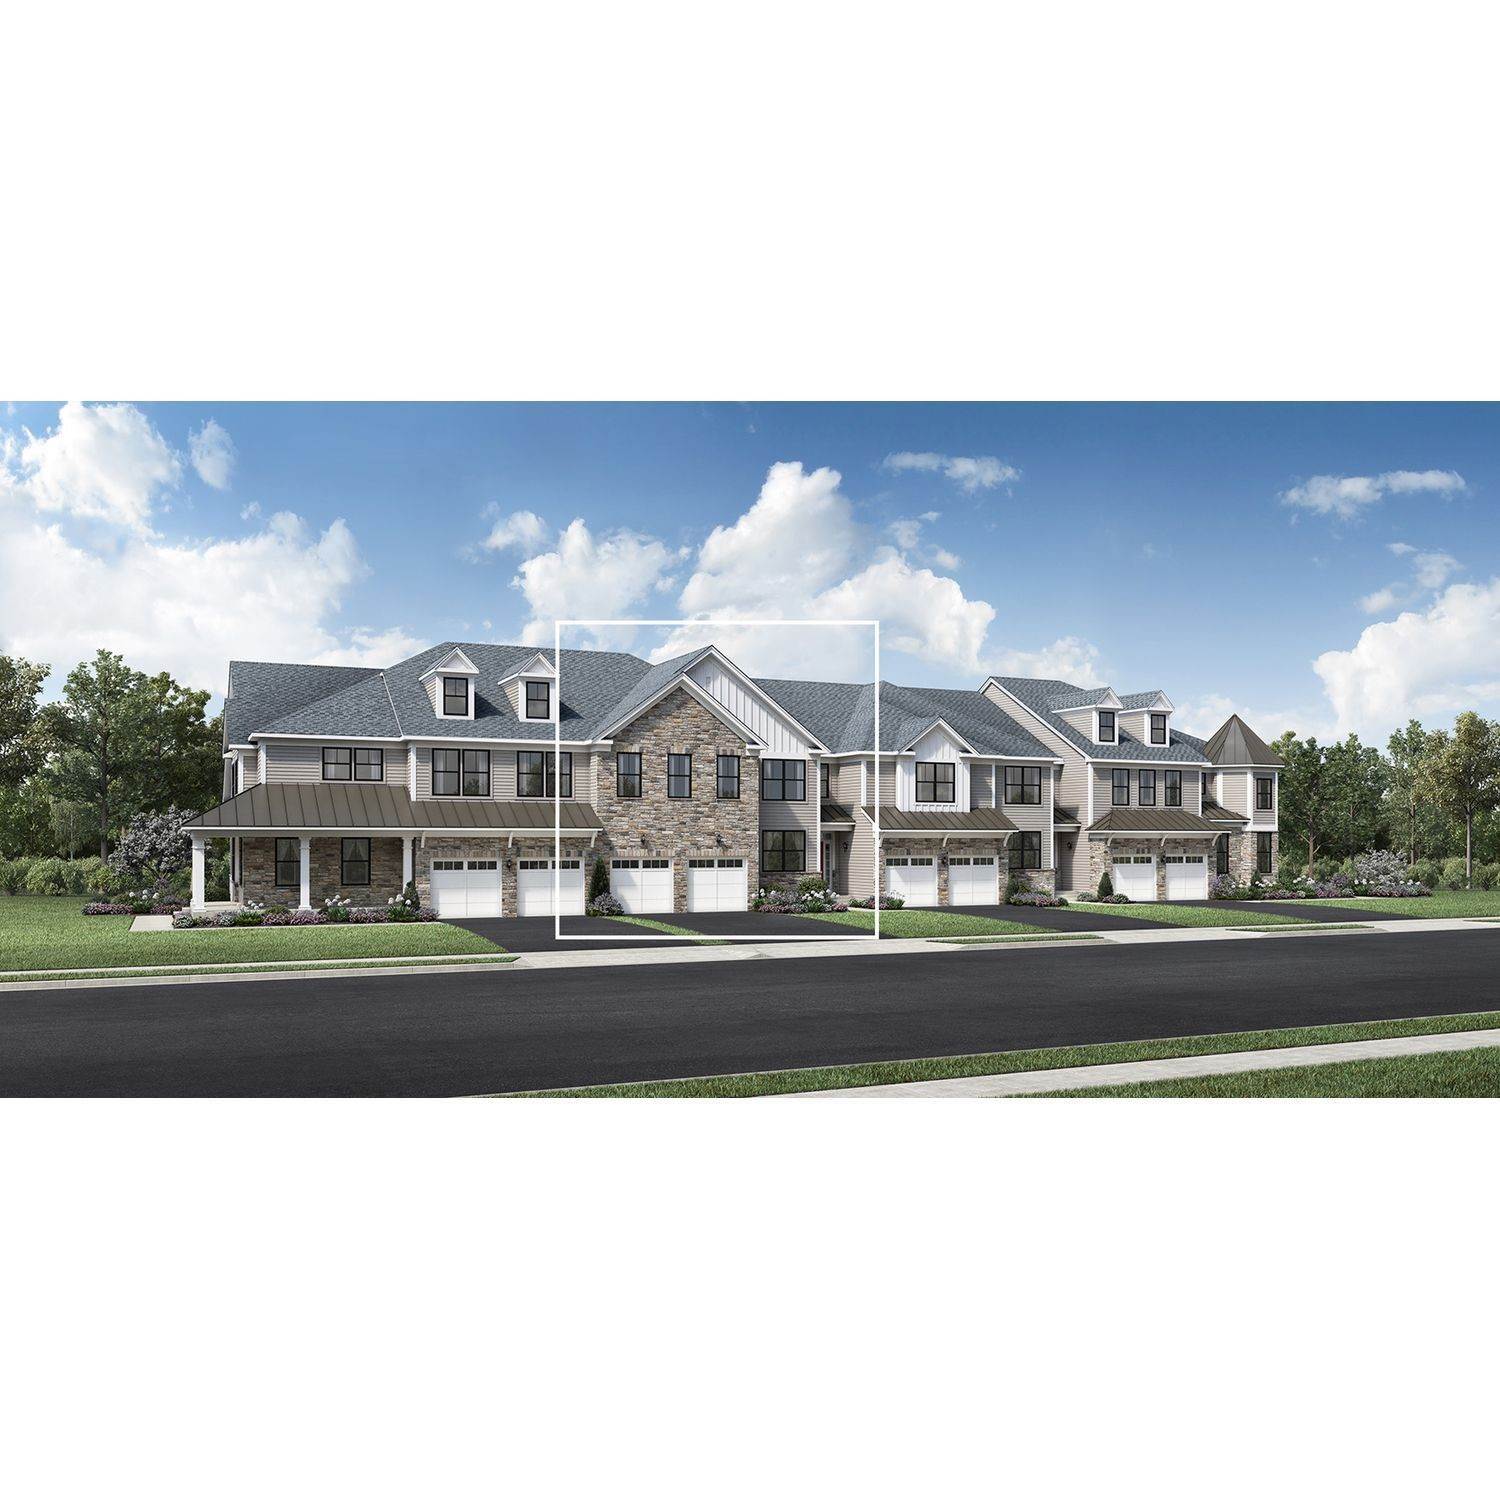 Multi Family for Sale at Villas At Warren - Amberley 2 Concord Ct WARREN, NEW JERSEY 07059 UNITED STATES